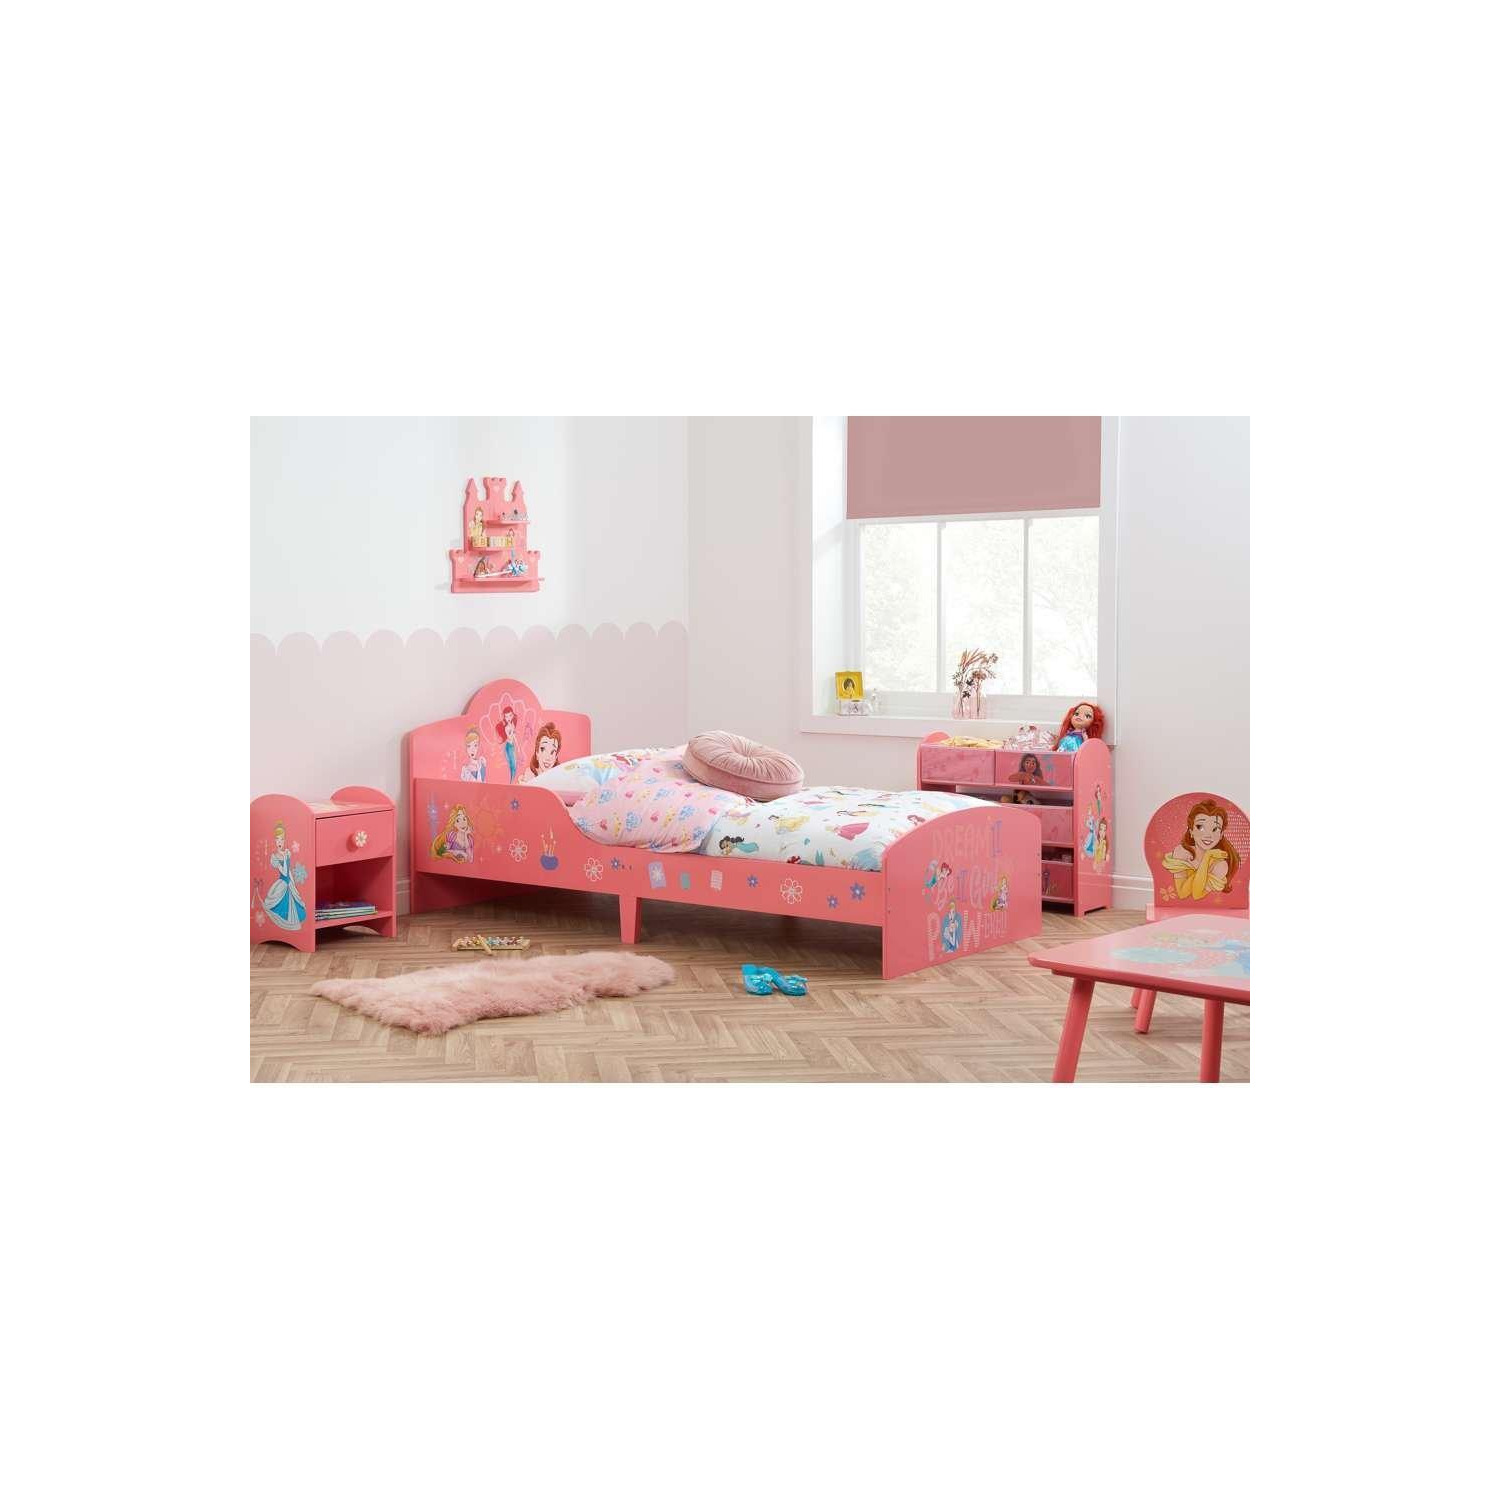 Official Disney Princess Single Bed Childrens - image 1